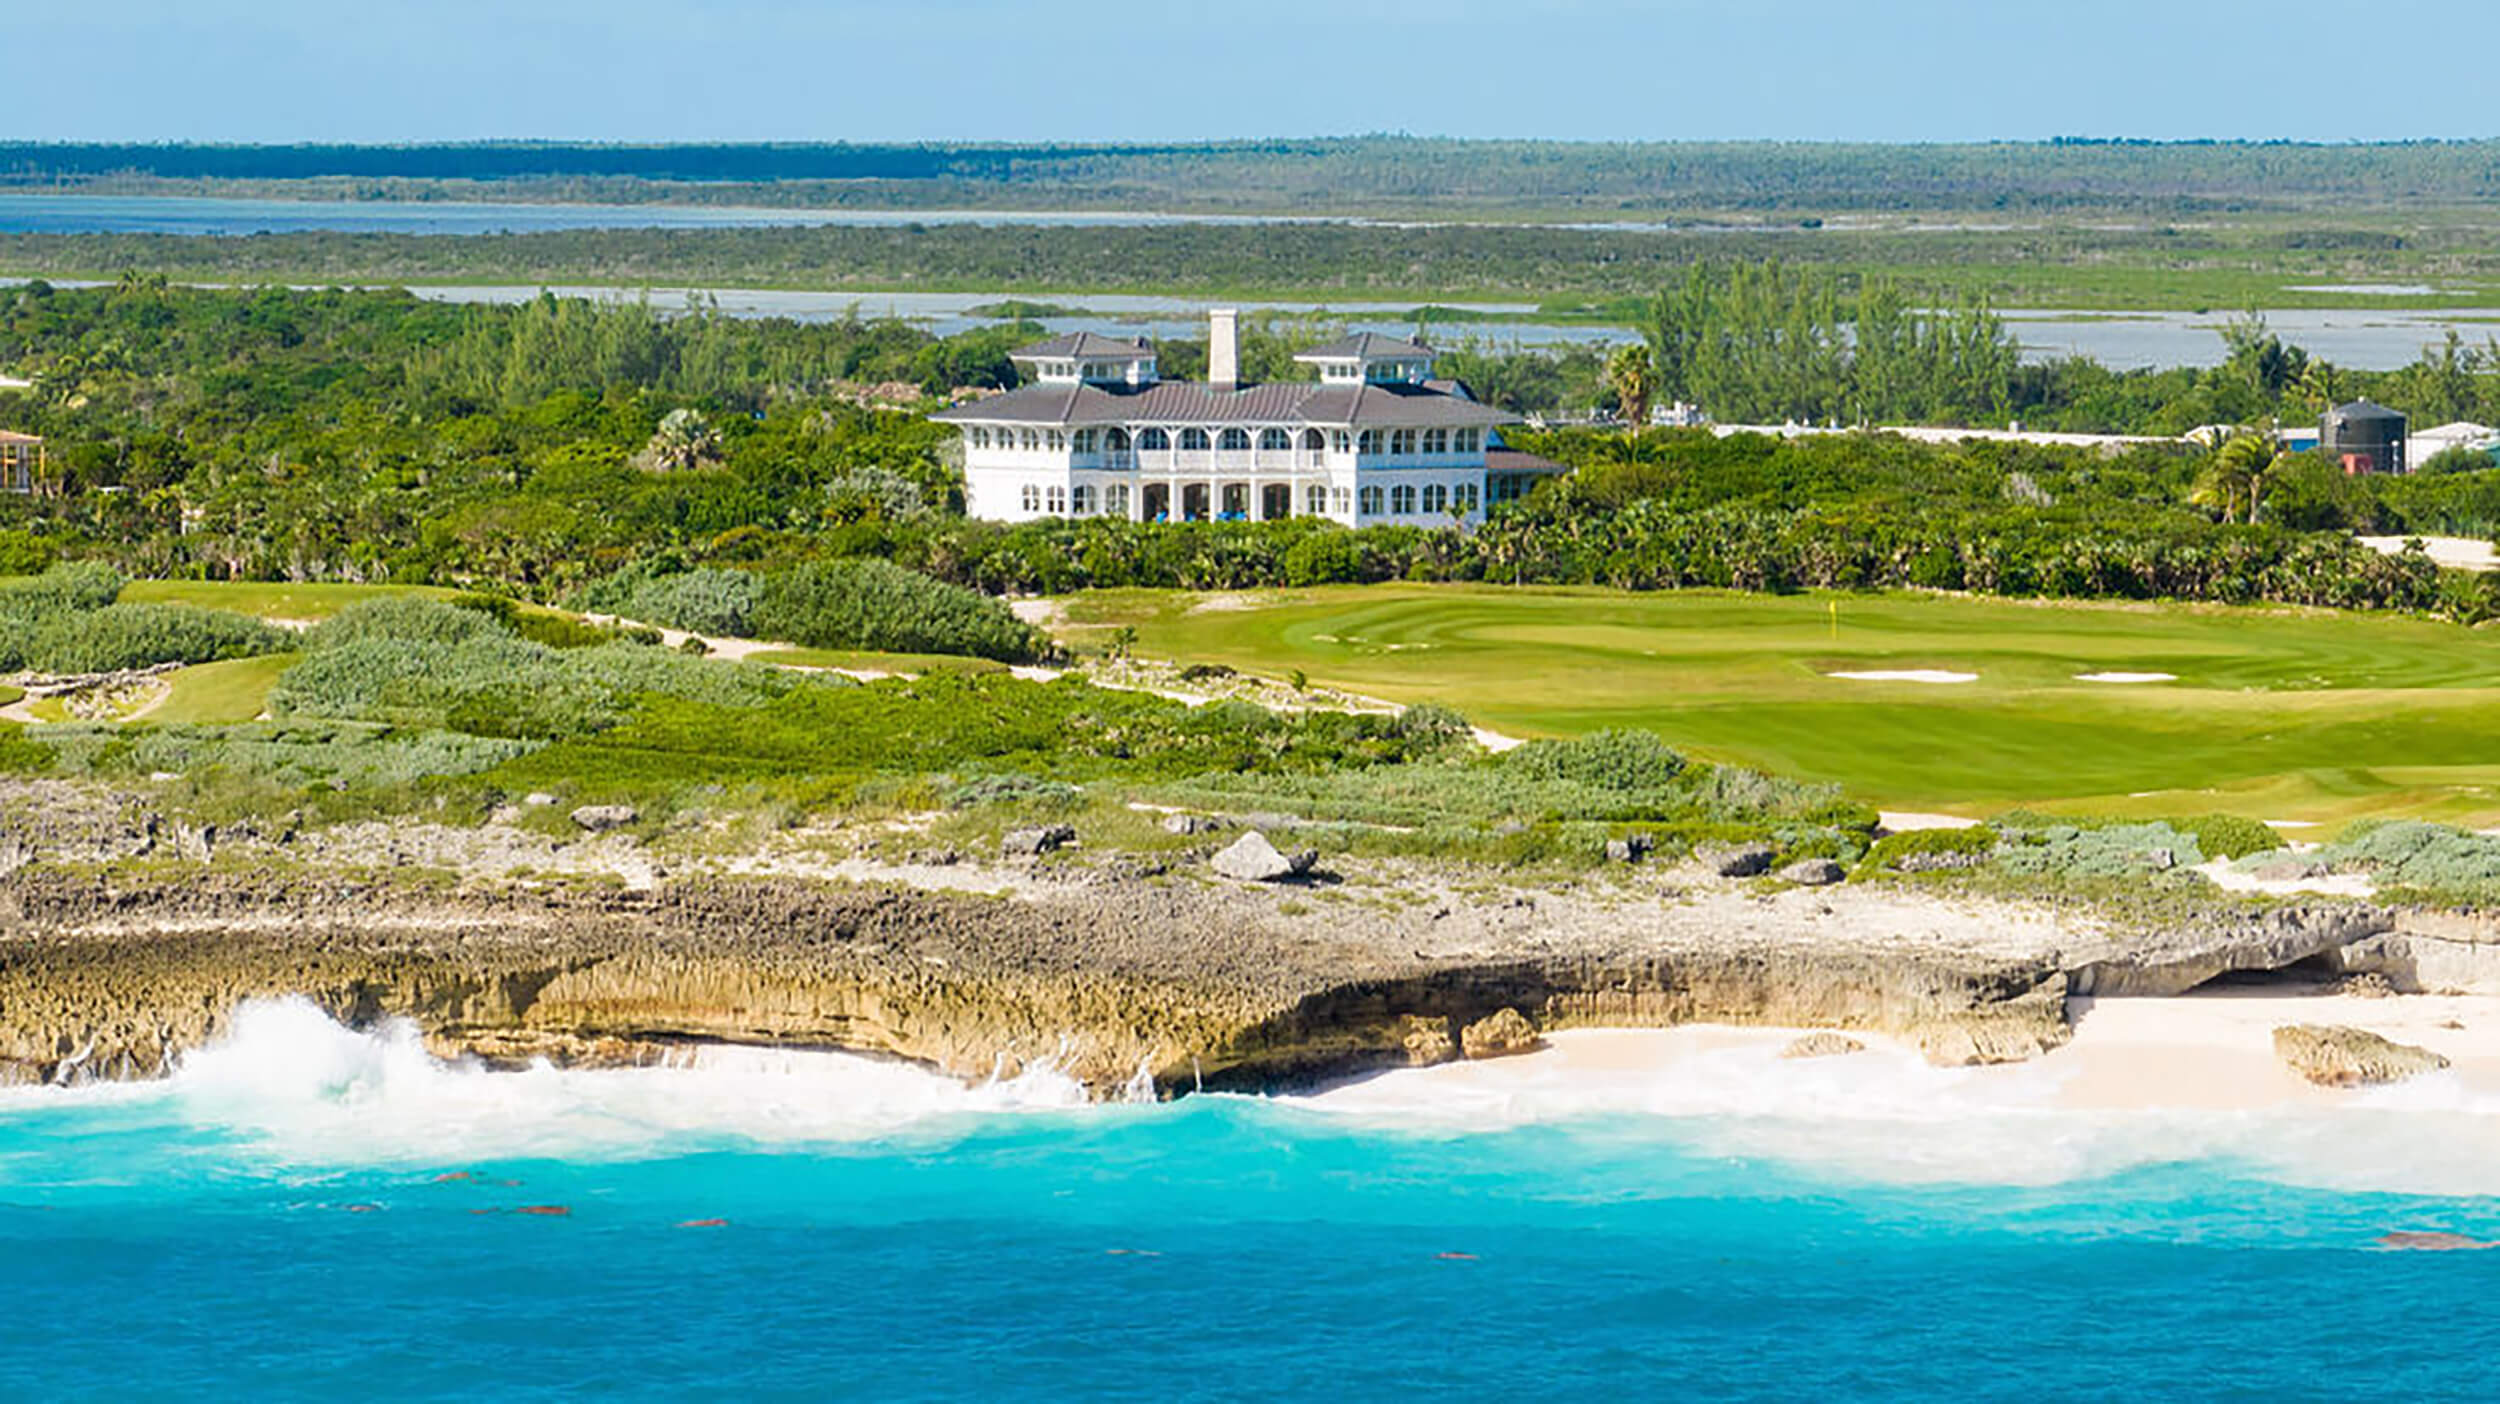 The Abaco Club Golf Course